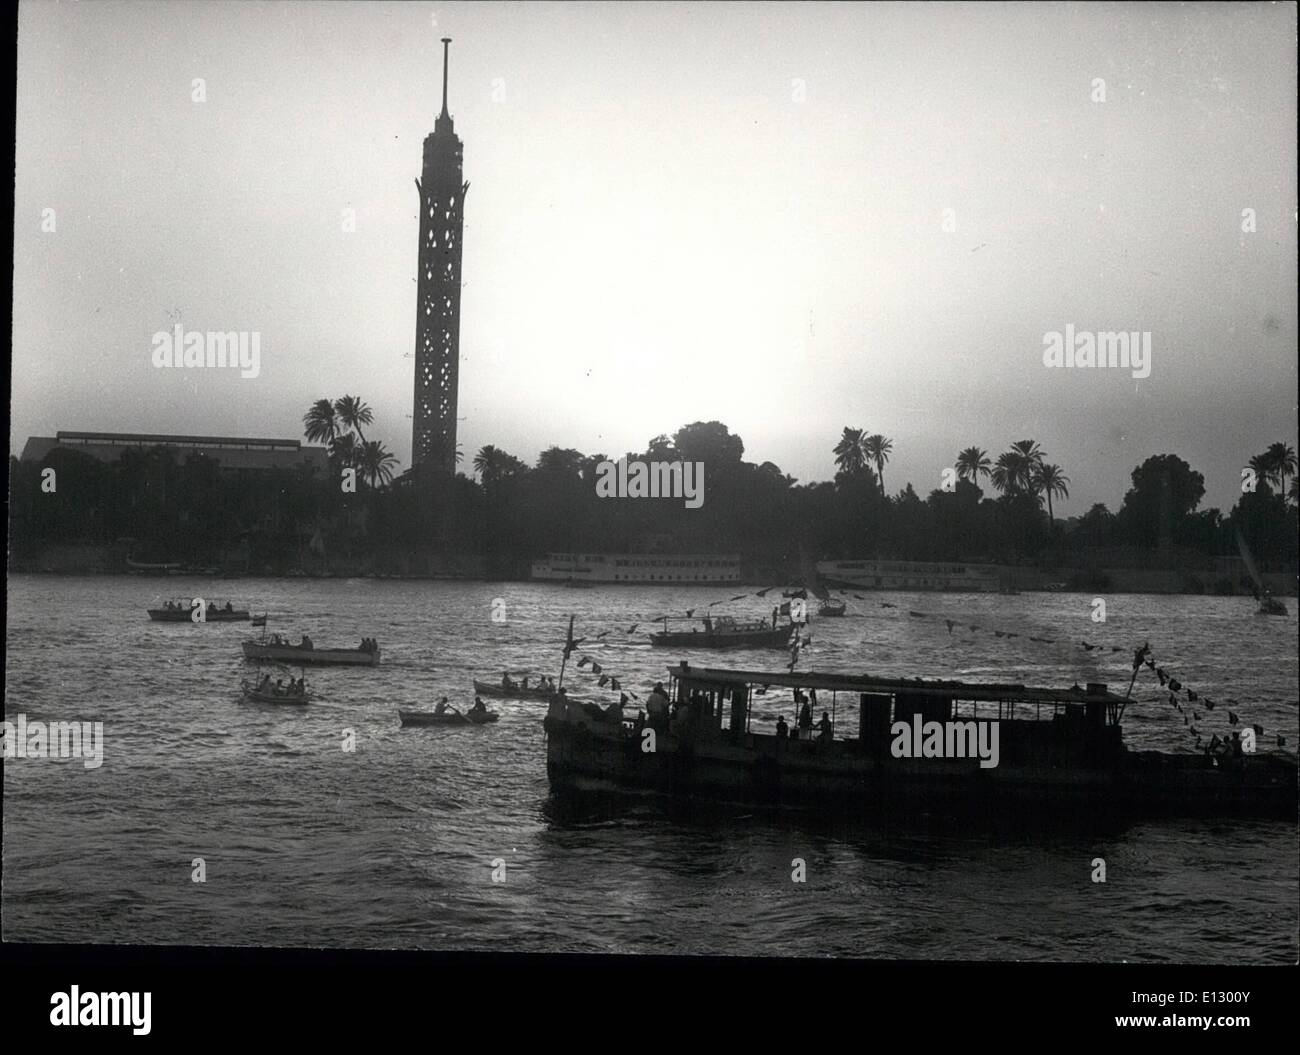 Feb. 25, 2012 - Wafa'a El Nil Ceremony (end of the inundation period) River boats procession sailing in the Nile. Guezira Tower is seen in the background. In old days, during the Pharonic ages, it was the custom to throw to the Nile a virgin as a sacrifice to the idolized river. With Islam, the brutal tradition was abolished and a dummy of a girl was used instead. Stock Photo